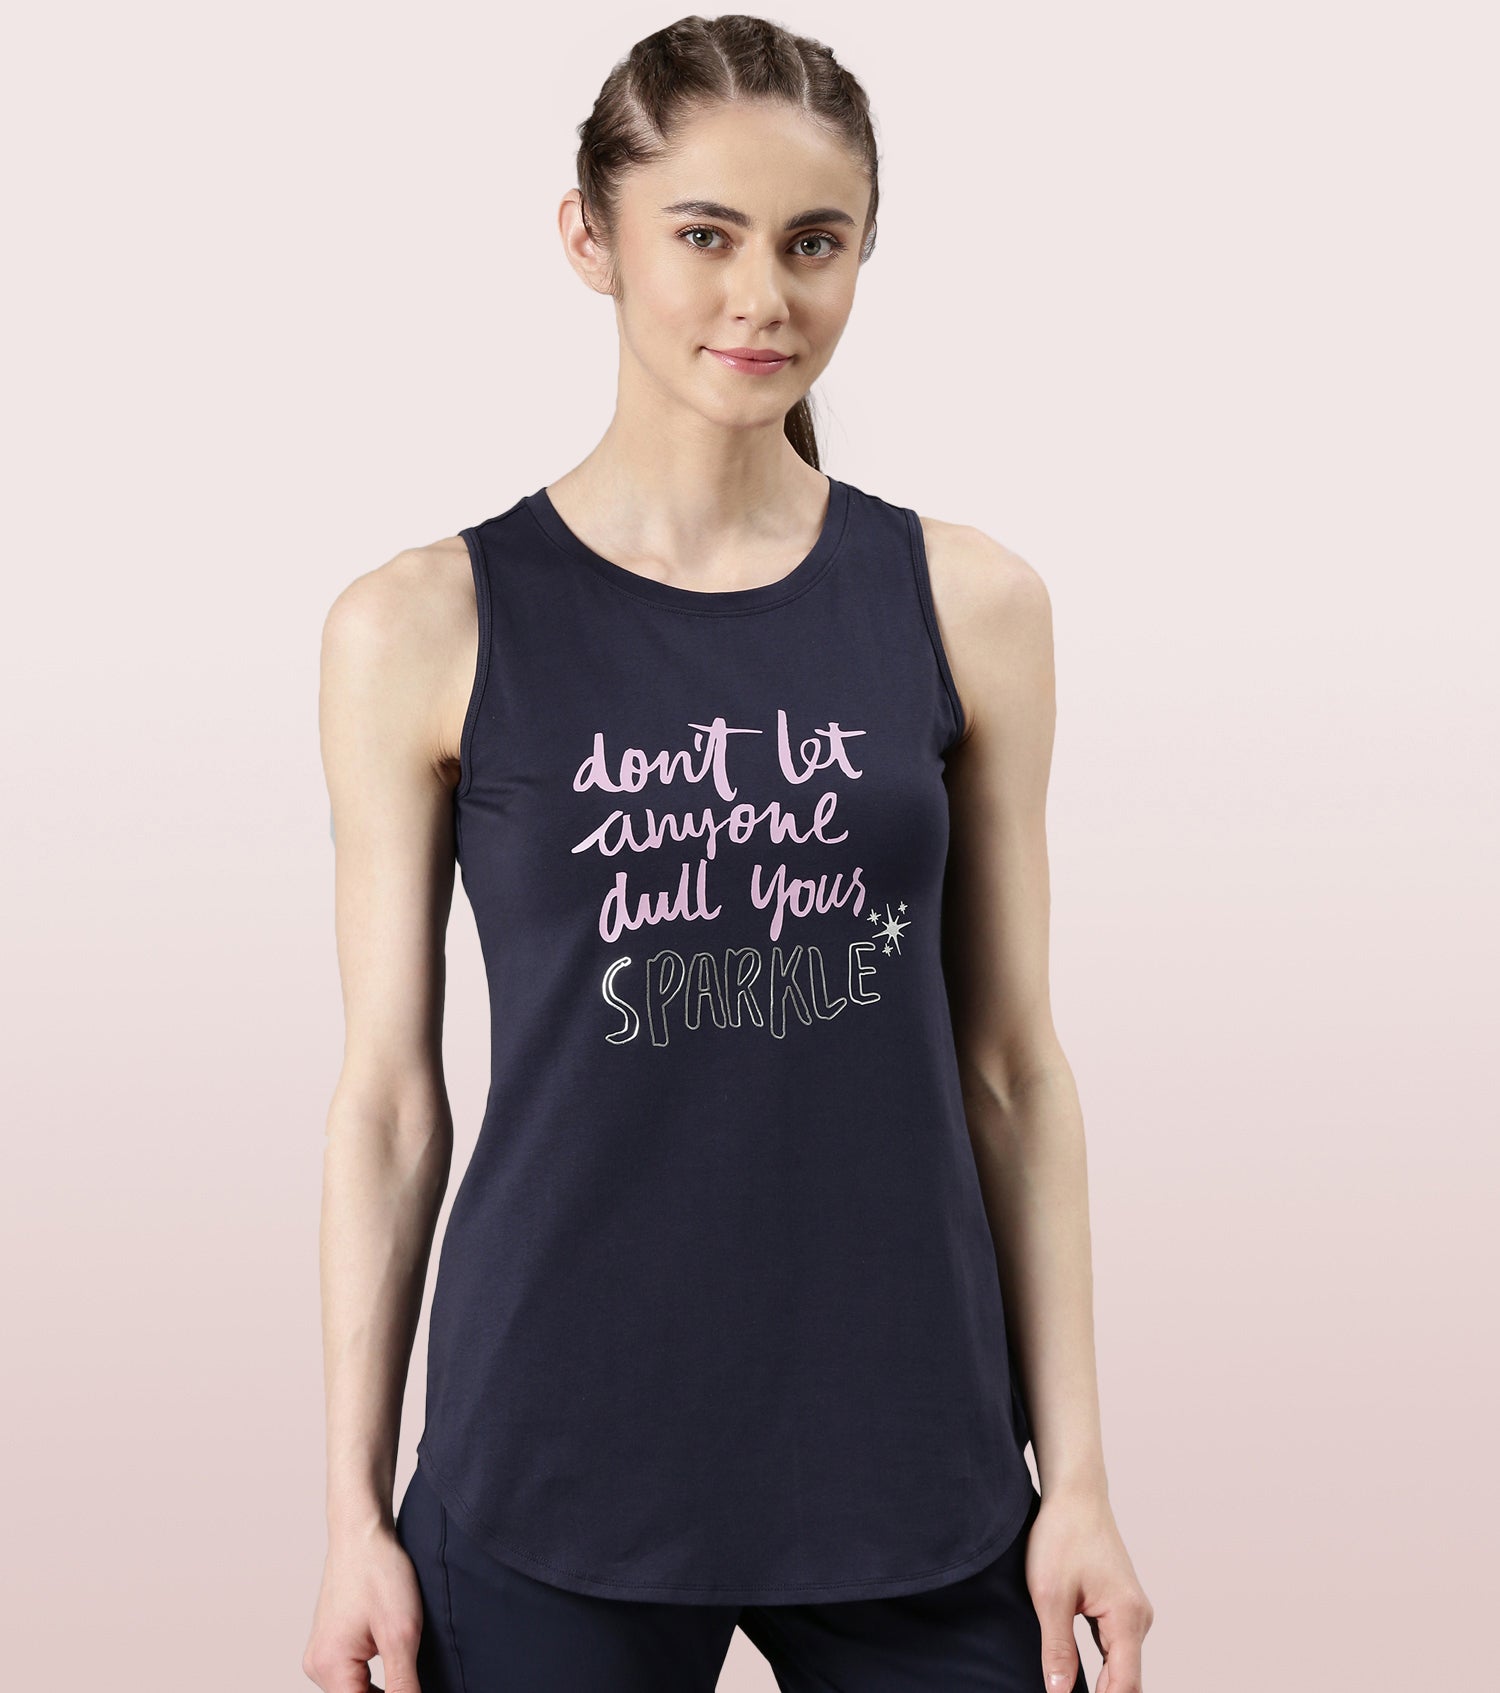 Athleisure- A307
ACTIVE COTTON TANK | ANTI ODOUR COTTON GRAPHIC HIP COVERING LONG LENGTH TANK
RELAXED FIT | LONG LENGTH